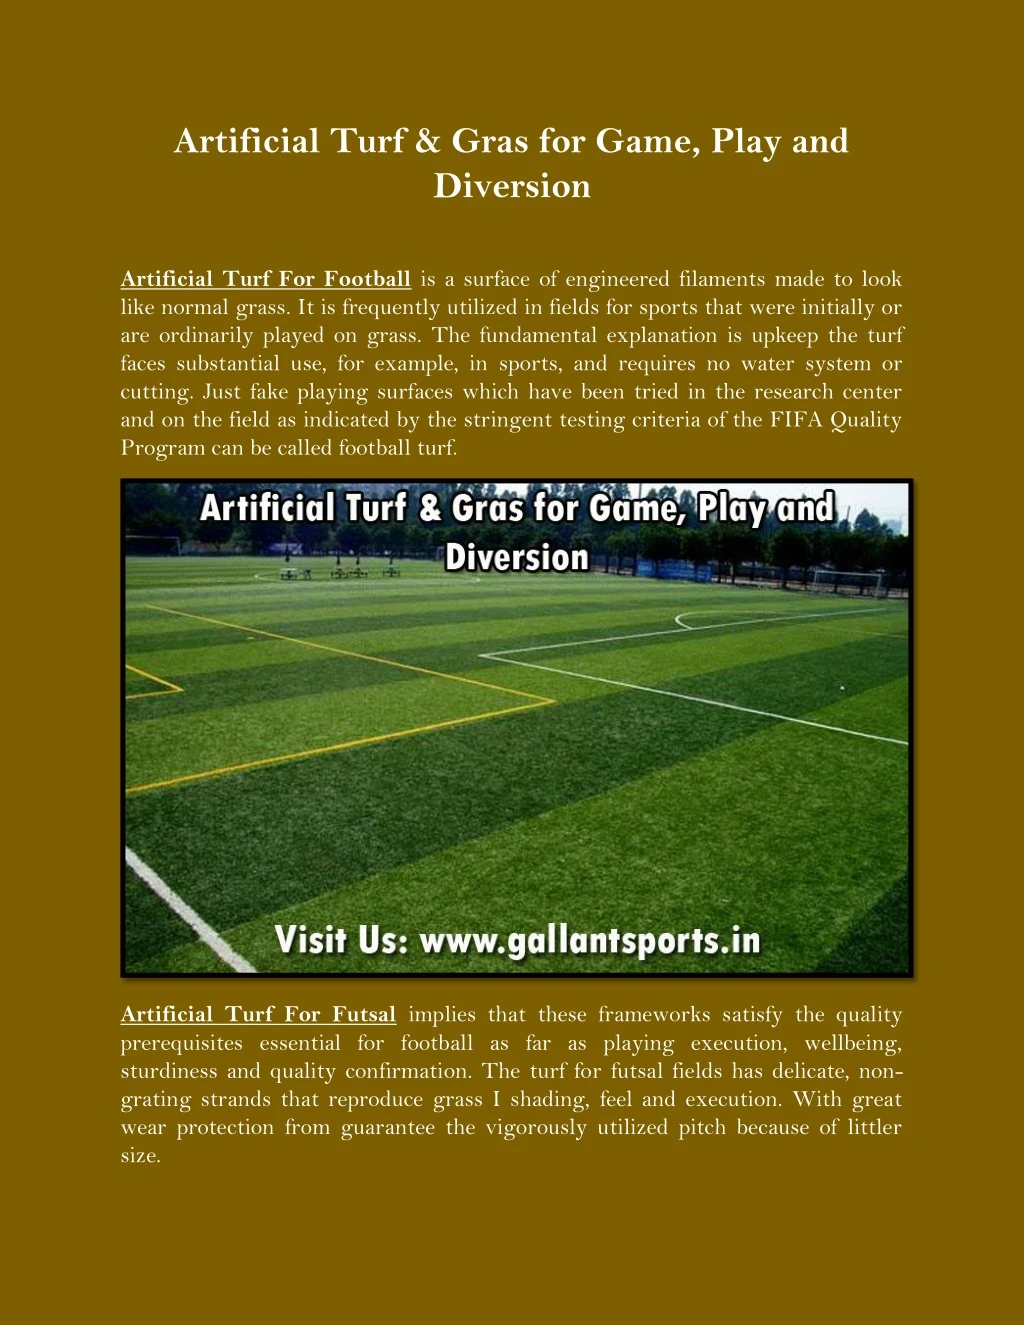 artificial turf gras for game play and diversion